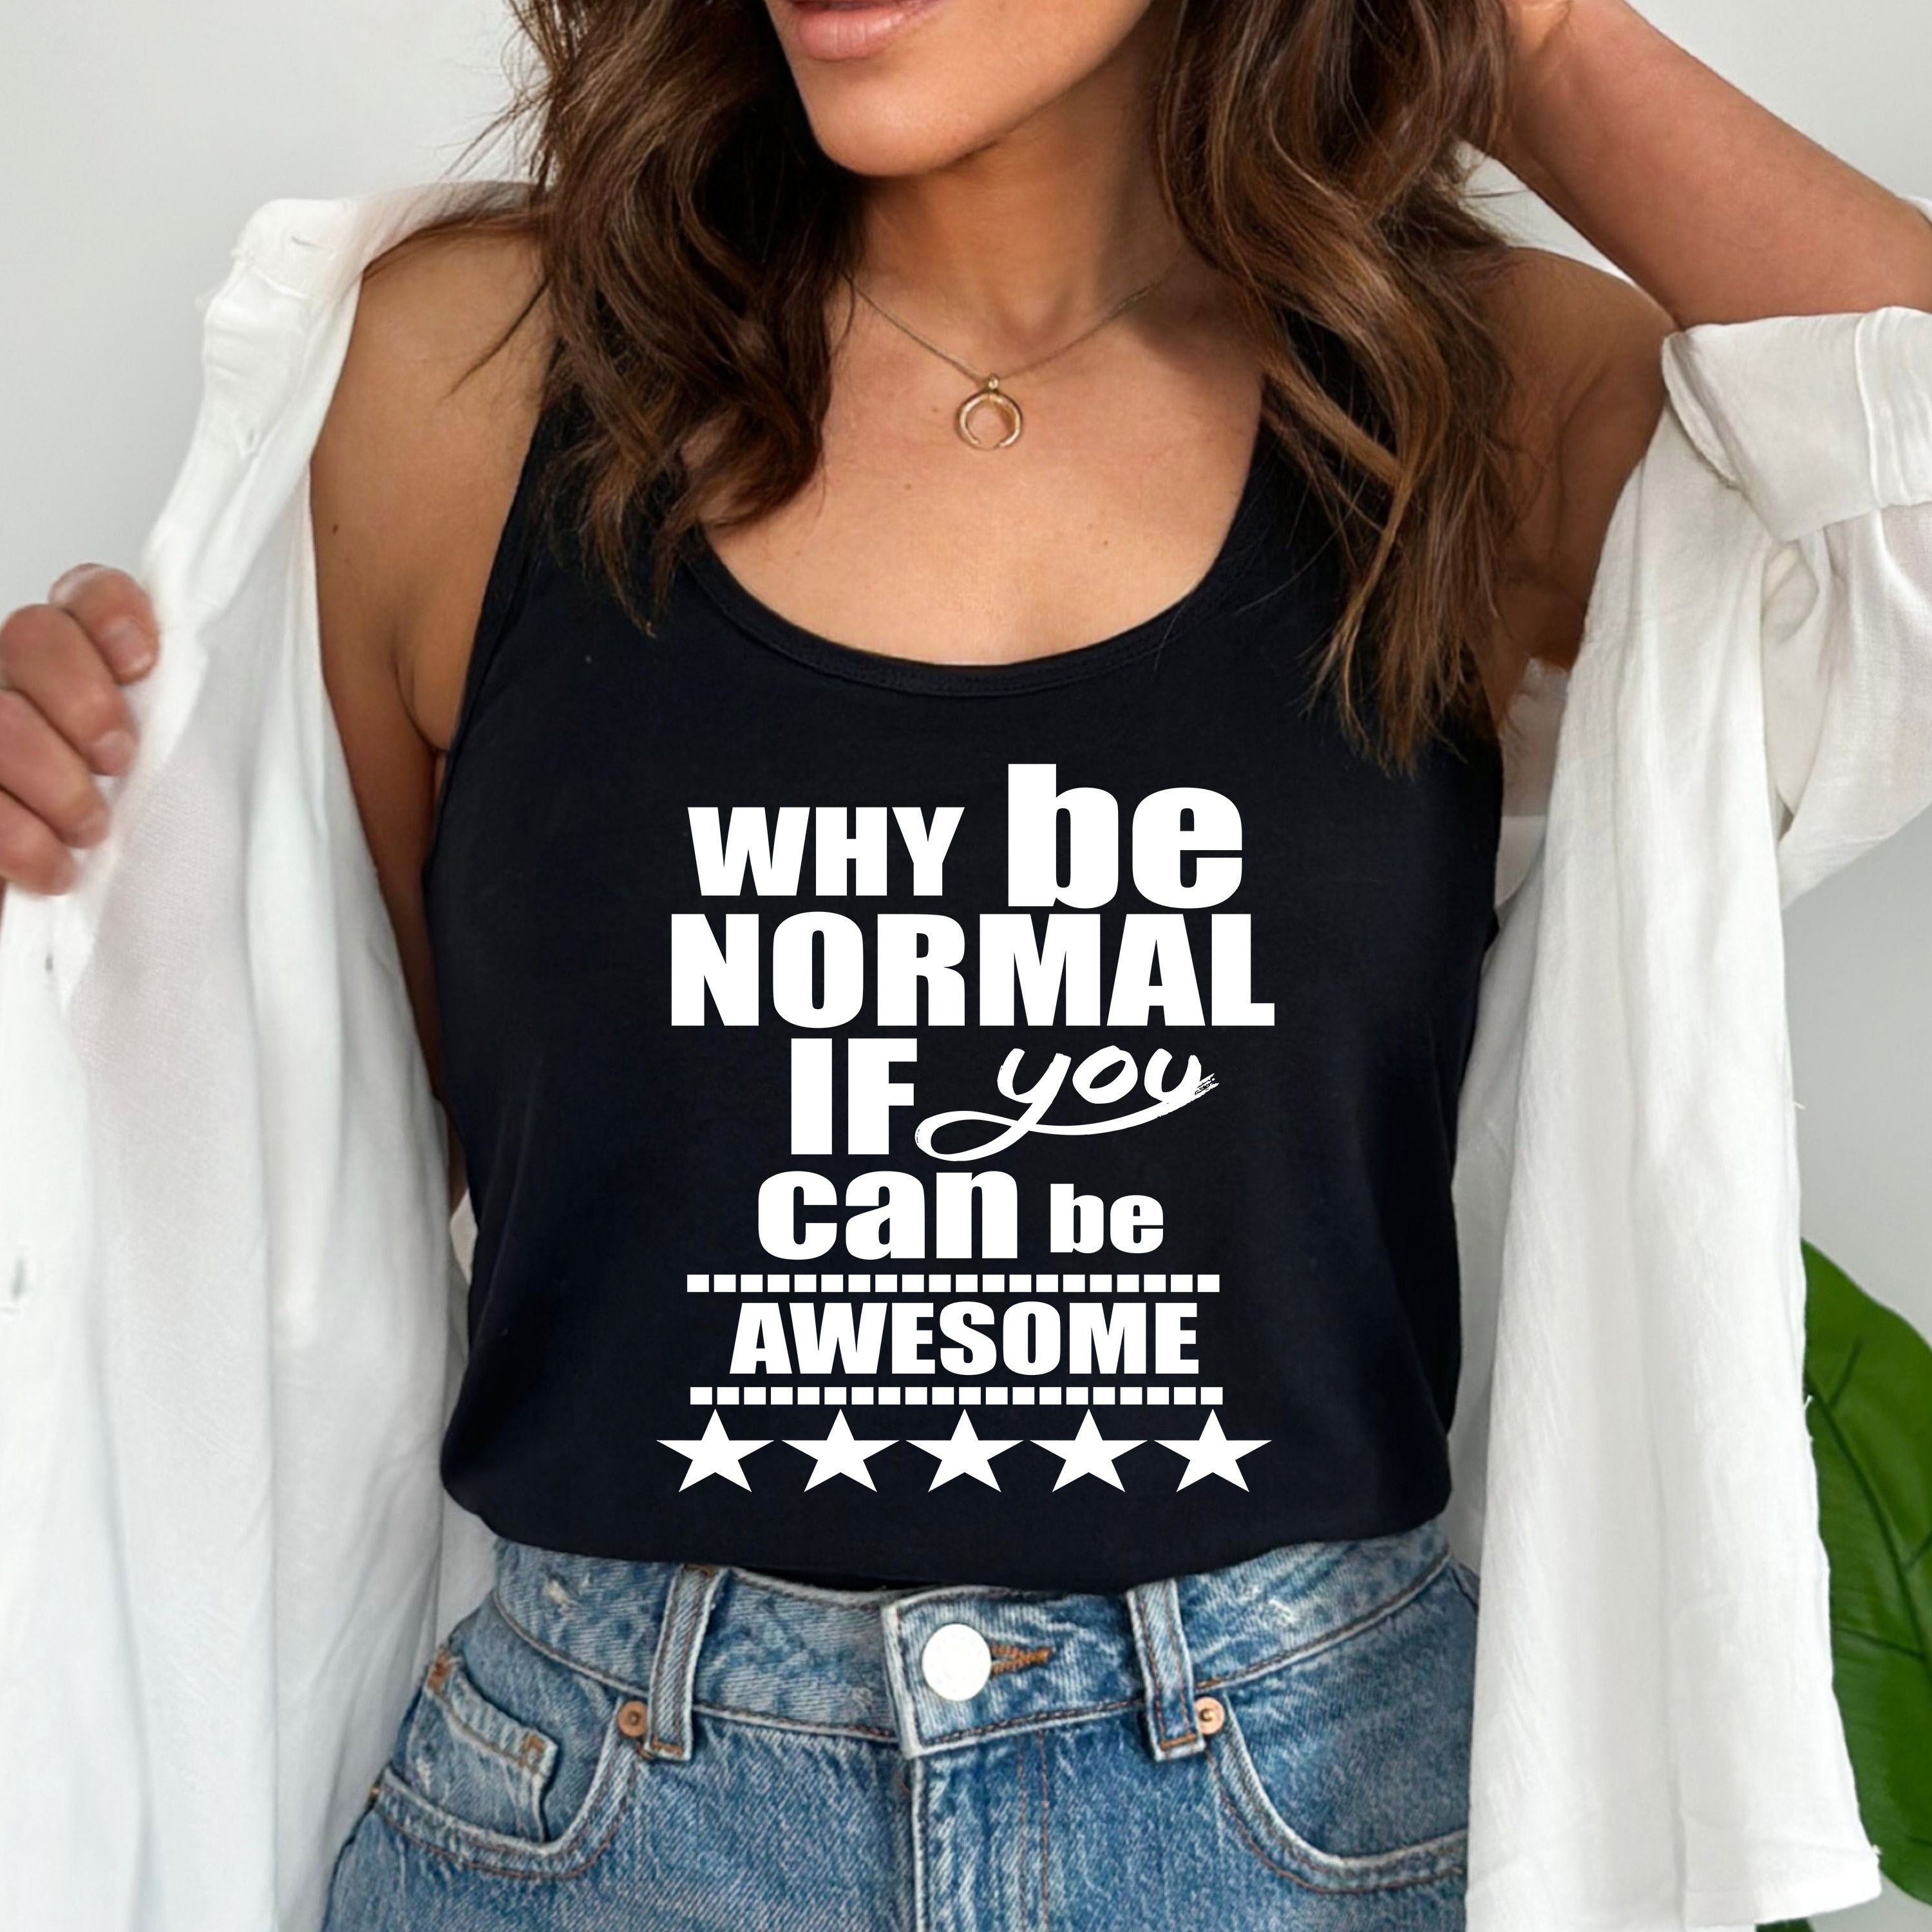 "WHY BE NORMAL IF YOU CAN BE AWESOME"